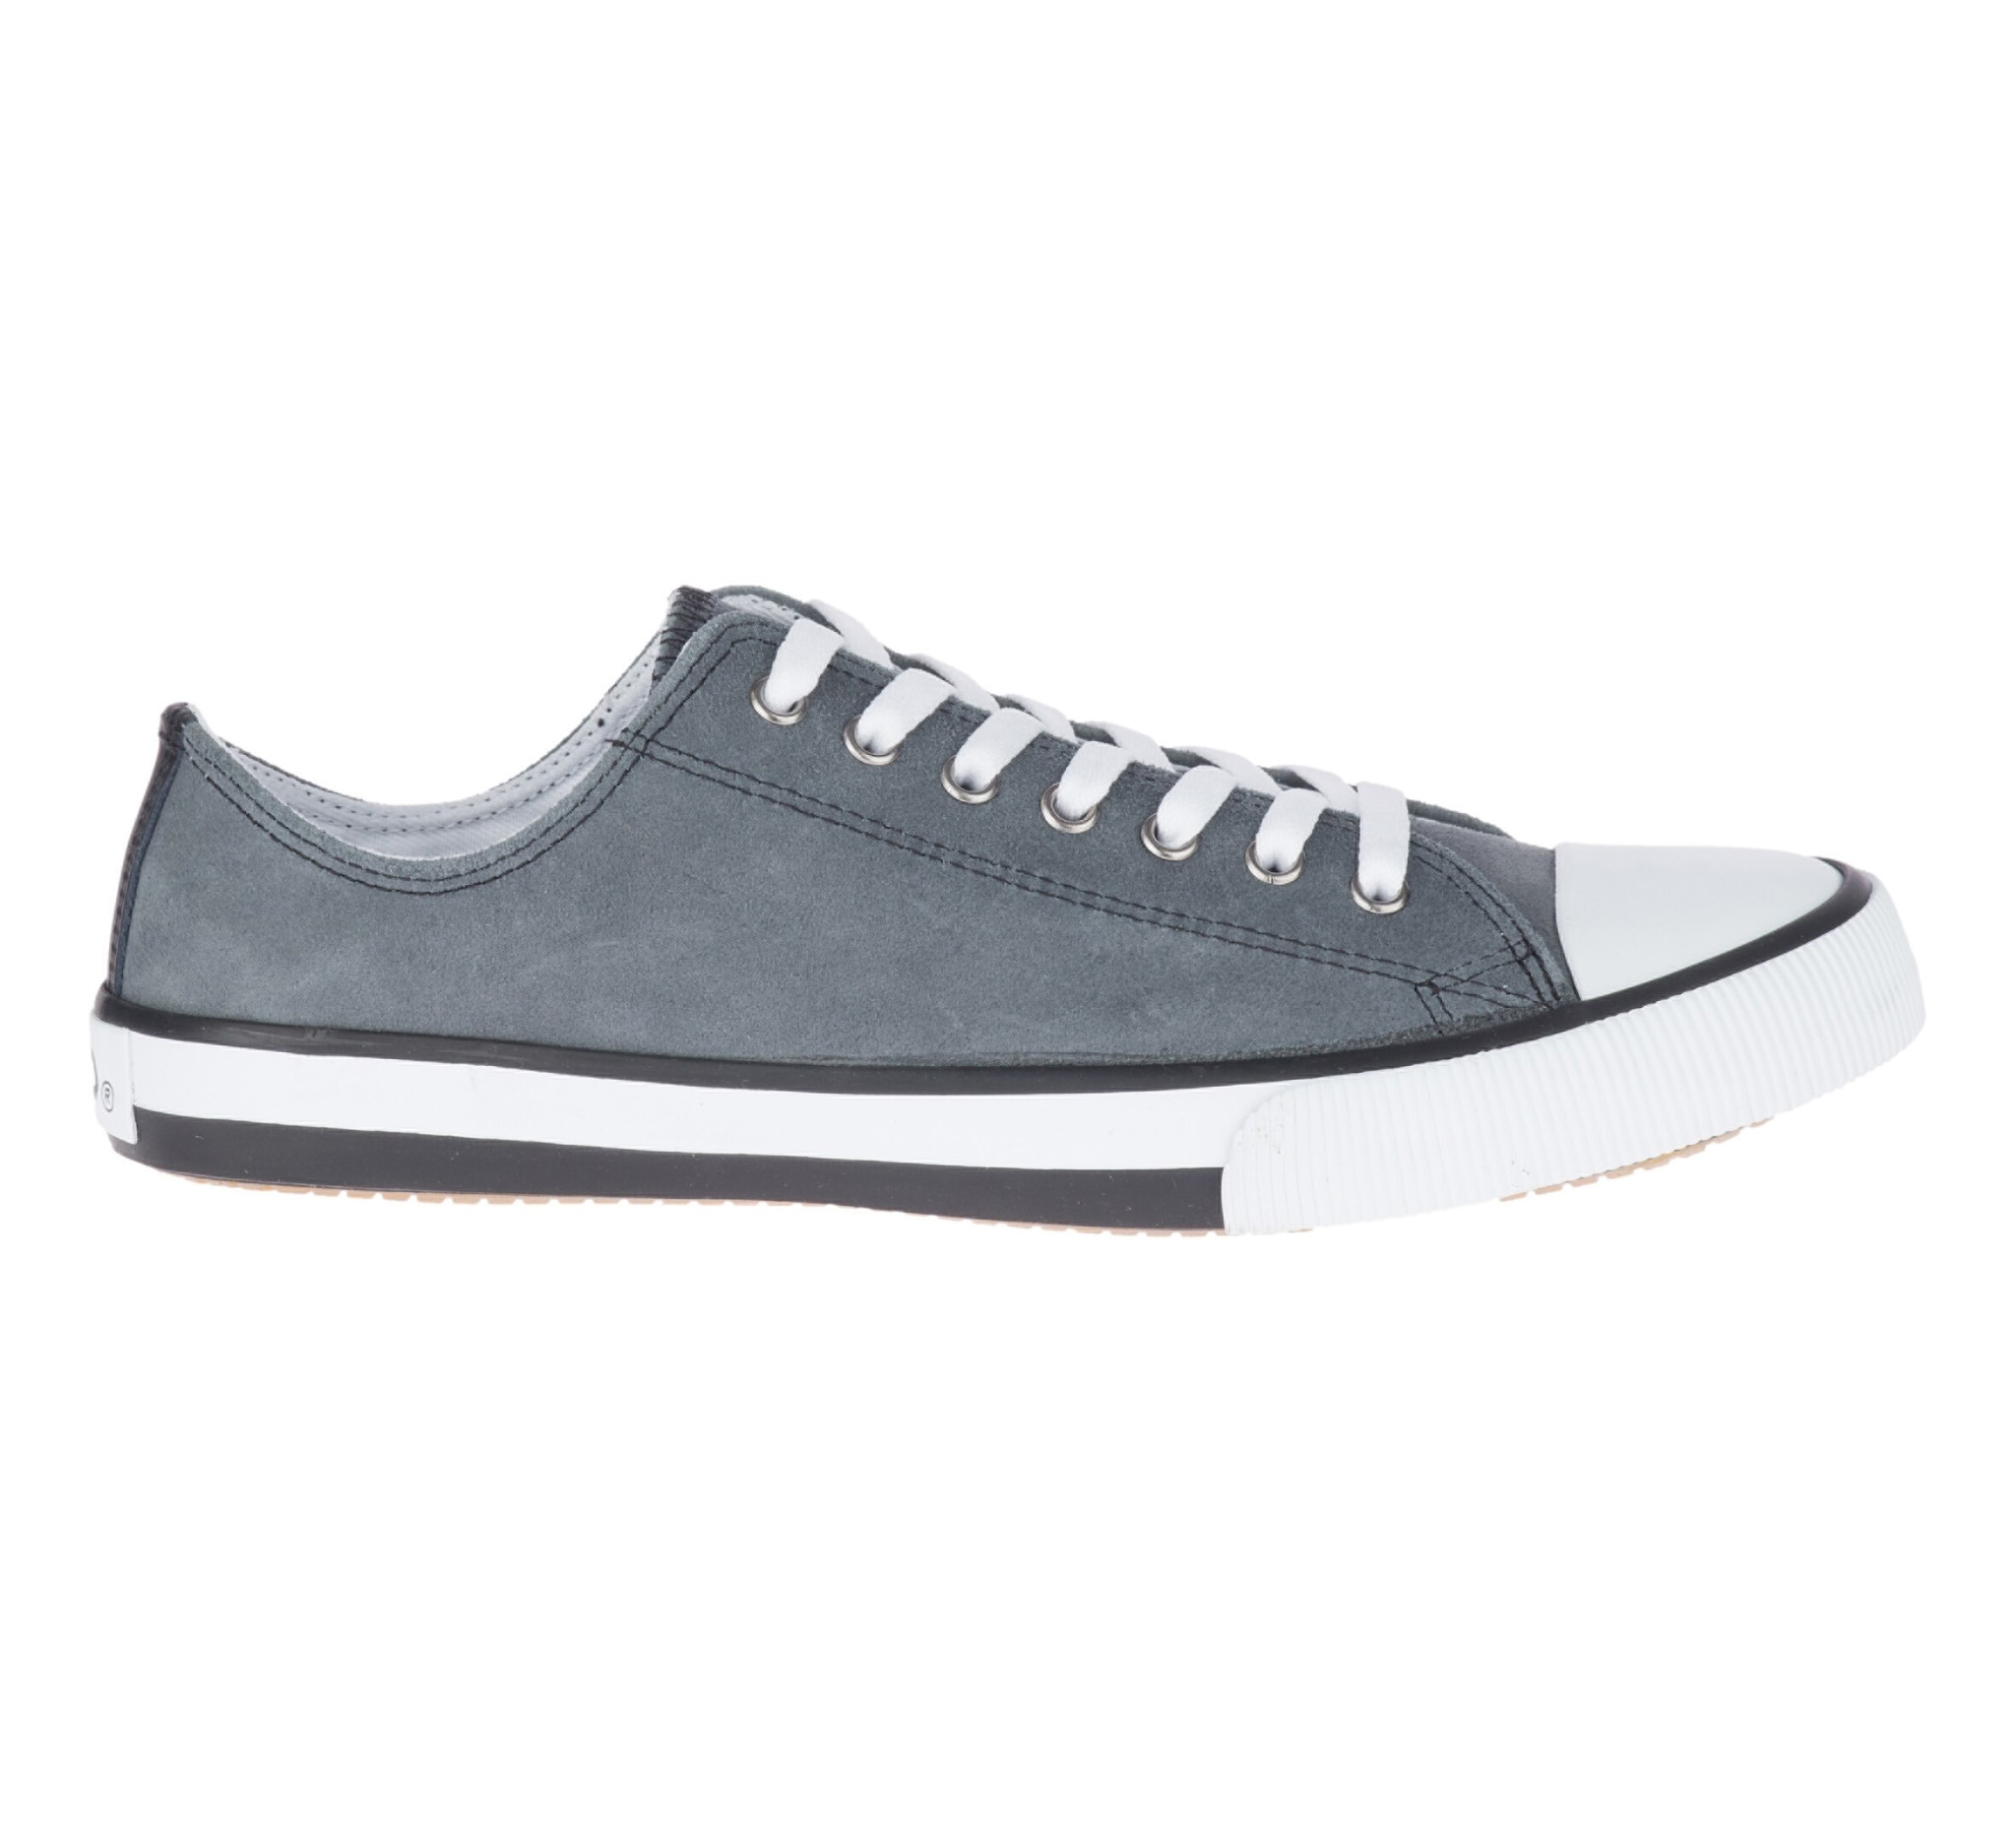 Men's Claymore Casual Shoes | Harley-Davidson USA